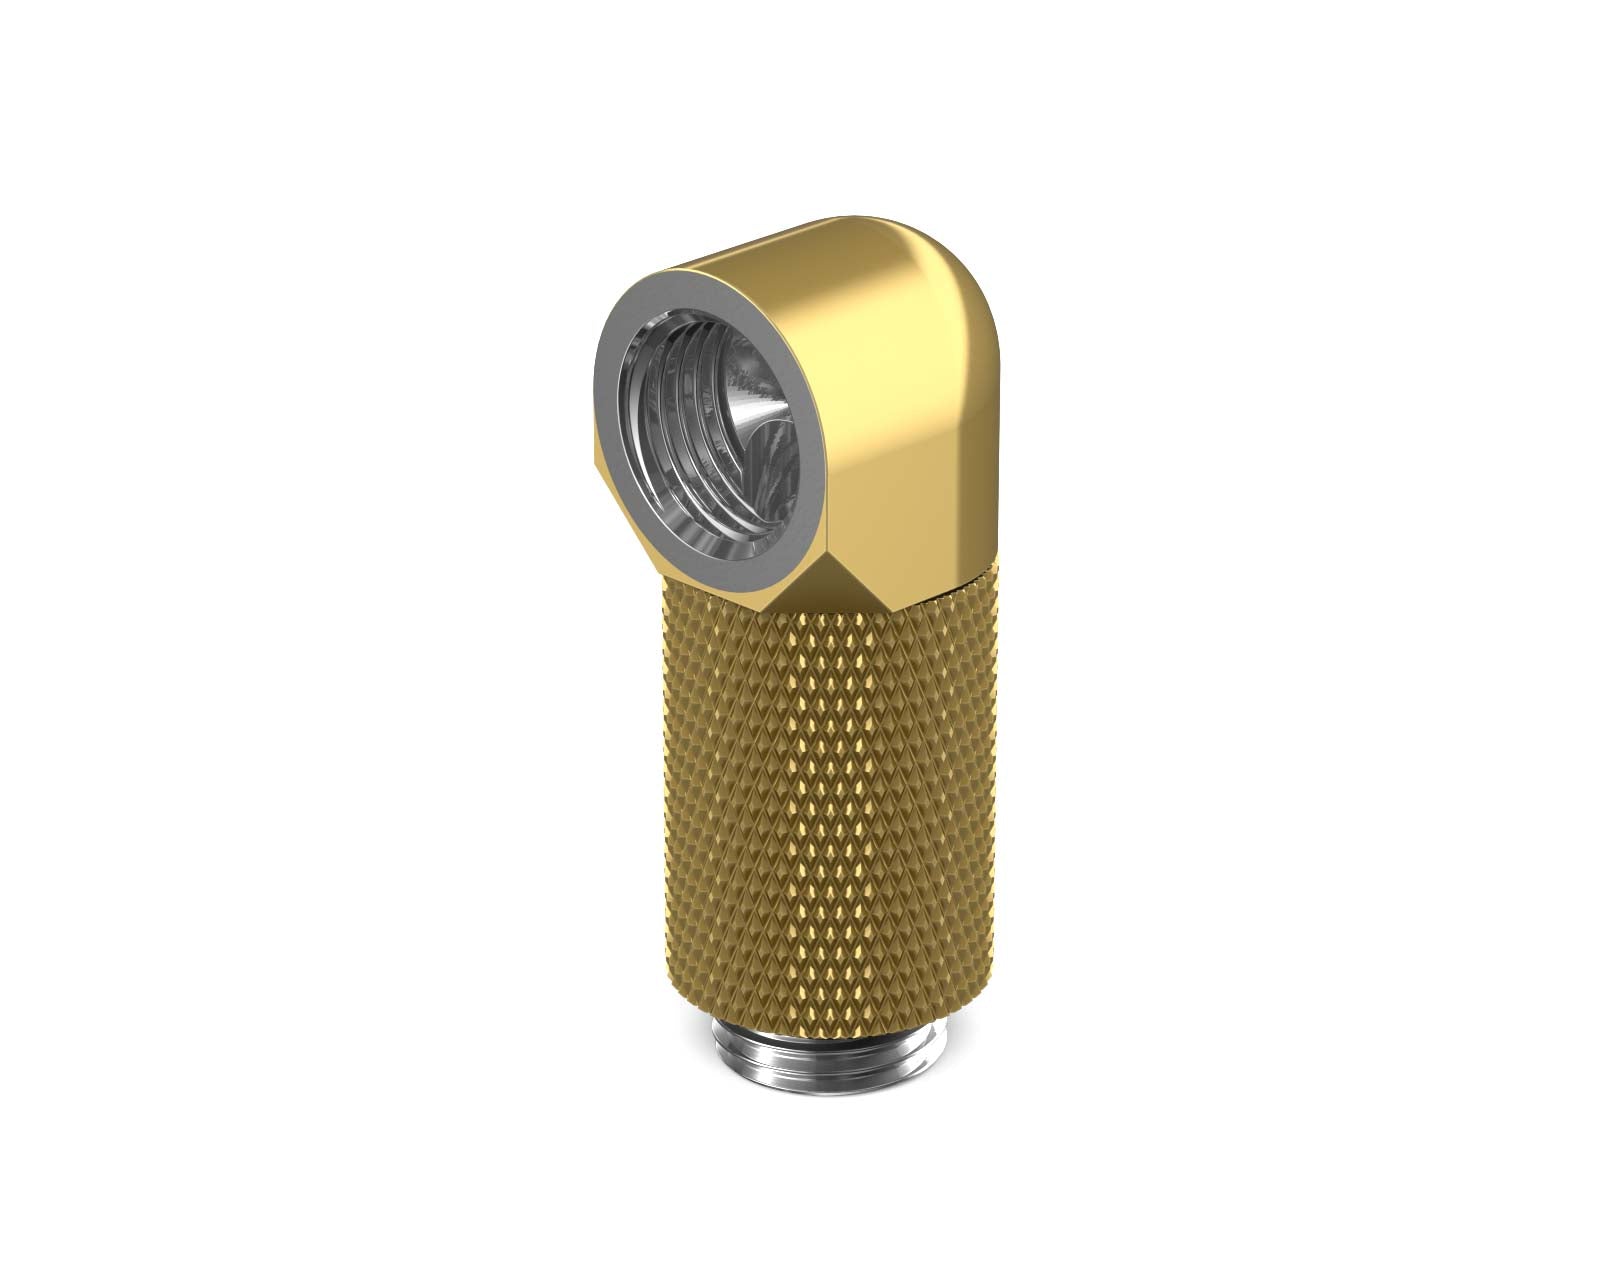 PrimoChill Male to Female G 1/4in. 90 Degree SX Rotary 25mm Extension Elbow Fitting - PrimoChill - KEEPING IT COOL Gold